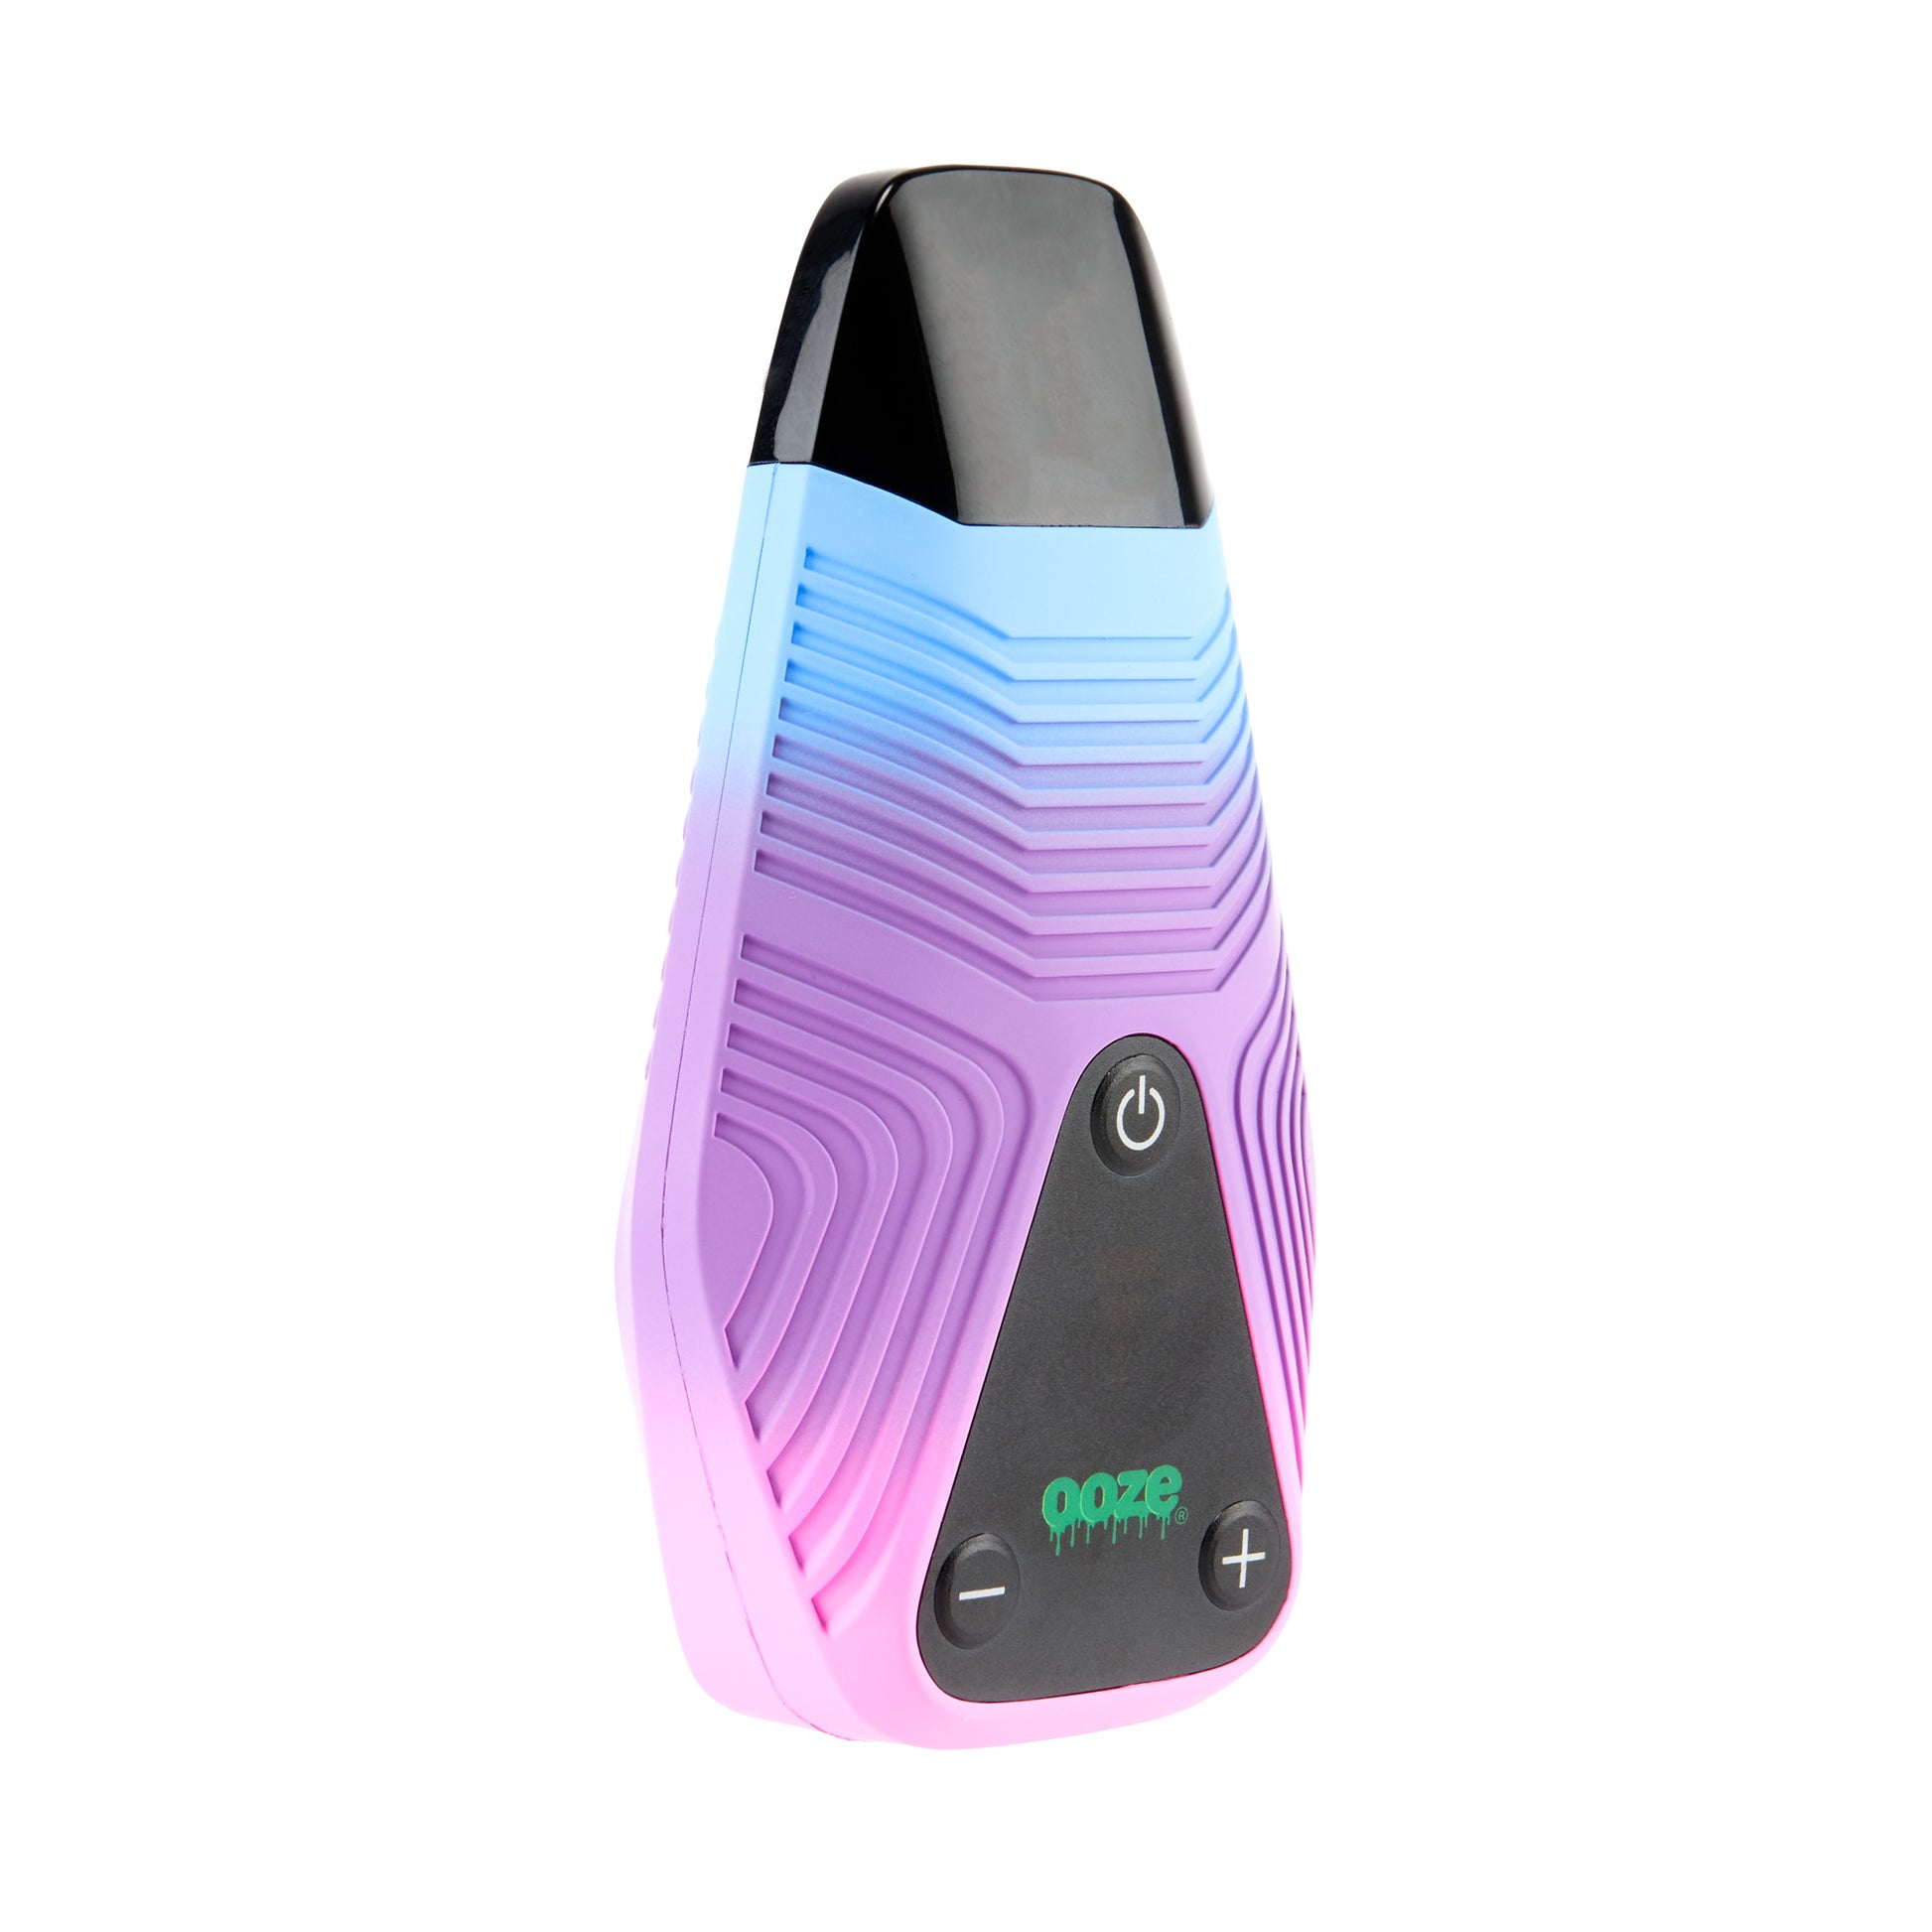 The twilight Ooze Brink dry herb vape is shown on an angle